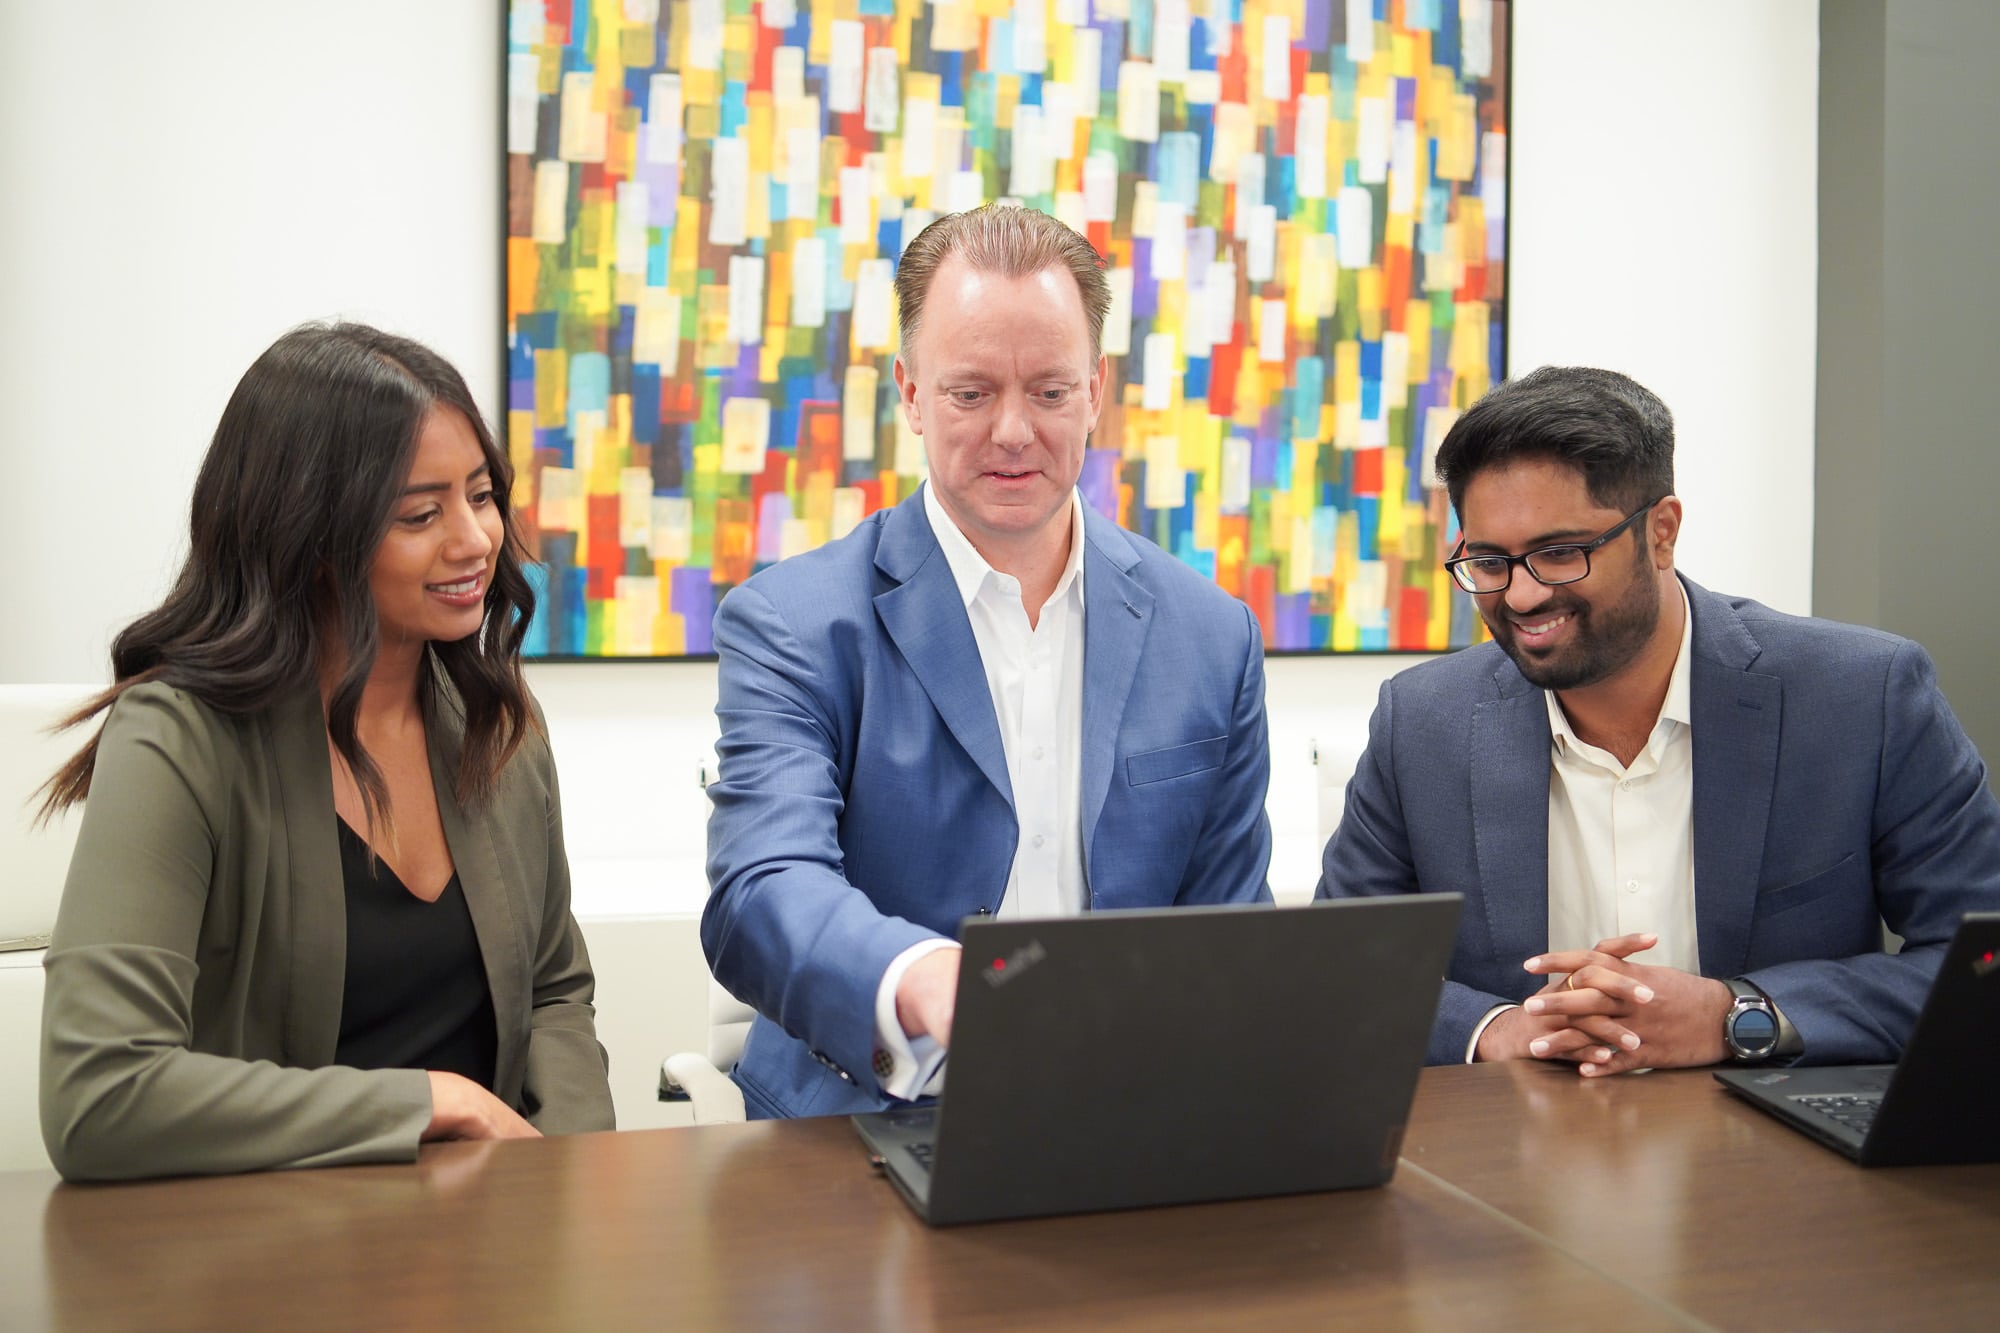 Three team members at a management consulting firm work together on a laptop. Behind them is a colourful abstract painting.